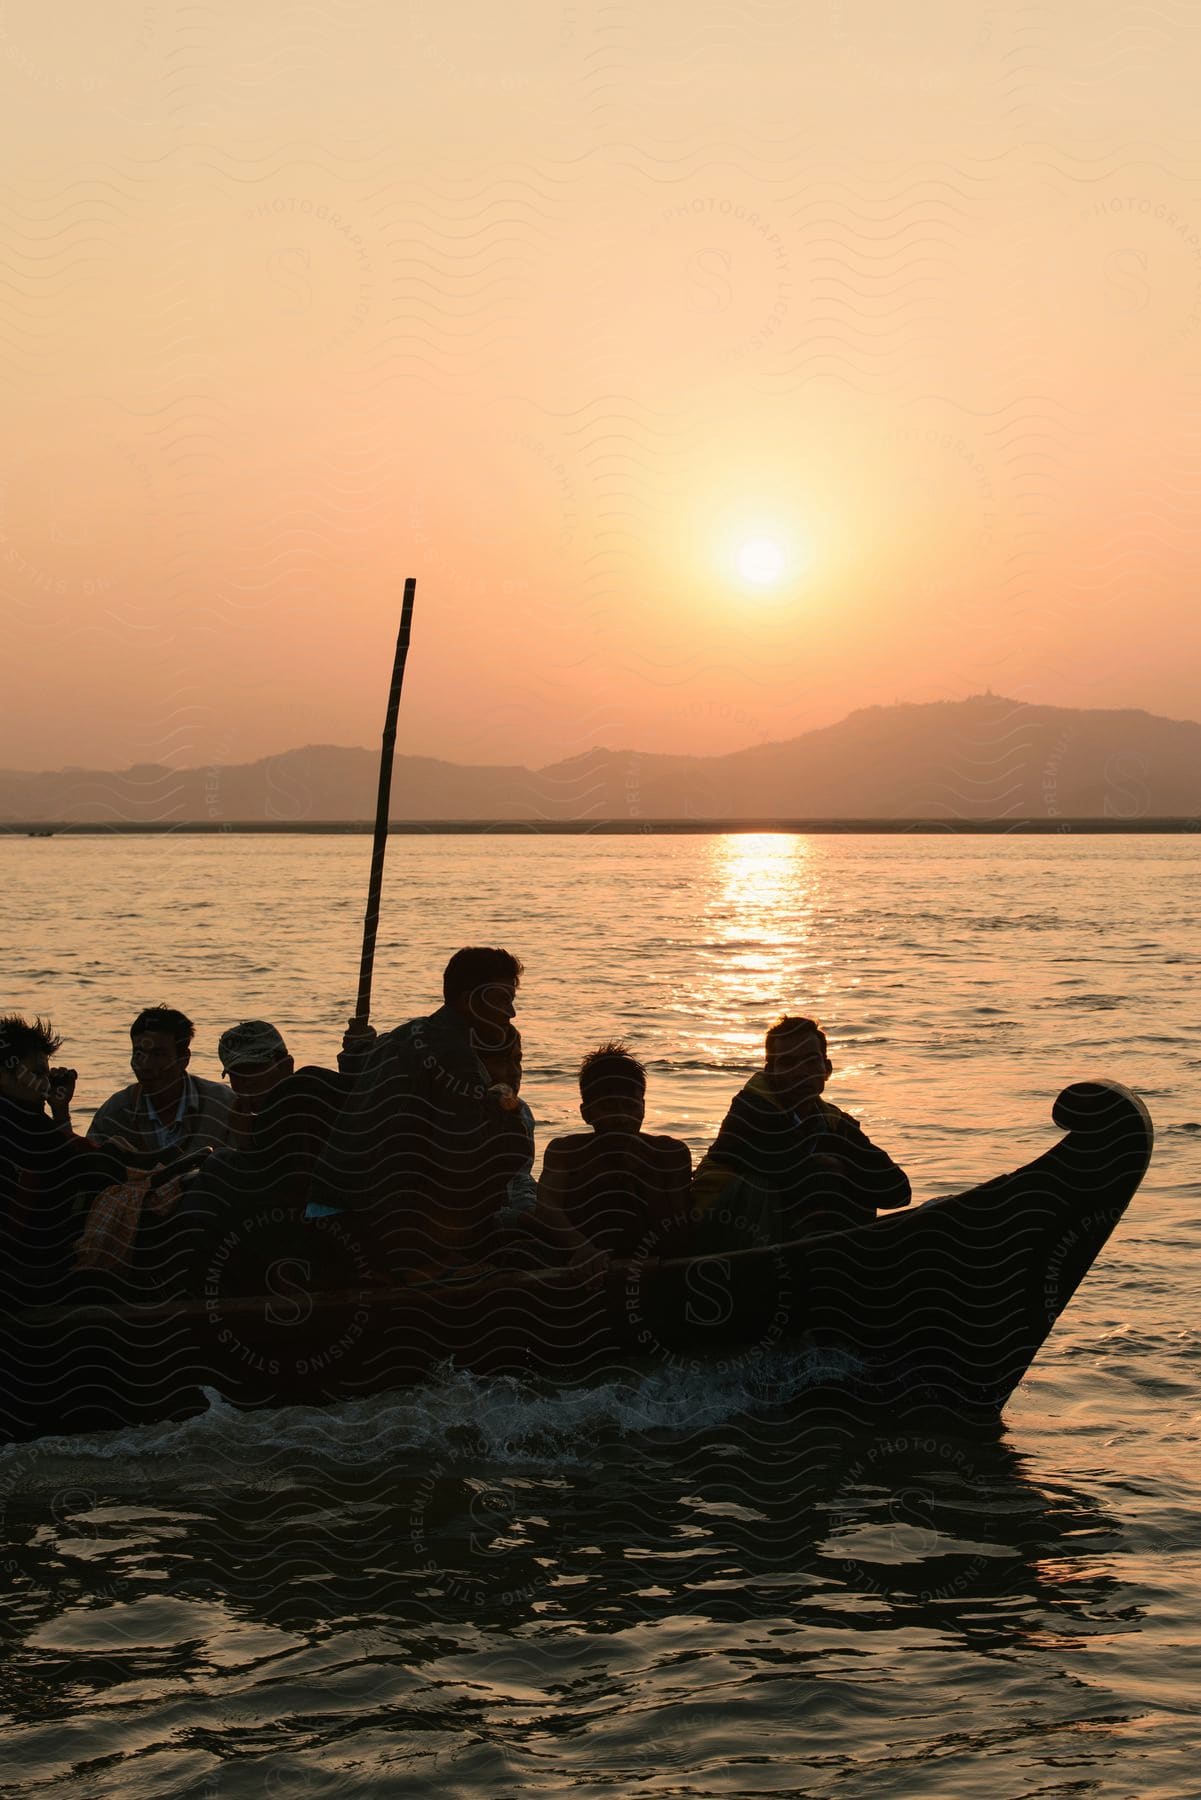 A group of men on a boat in the ocean with mountains in the distance